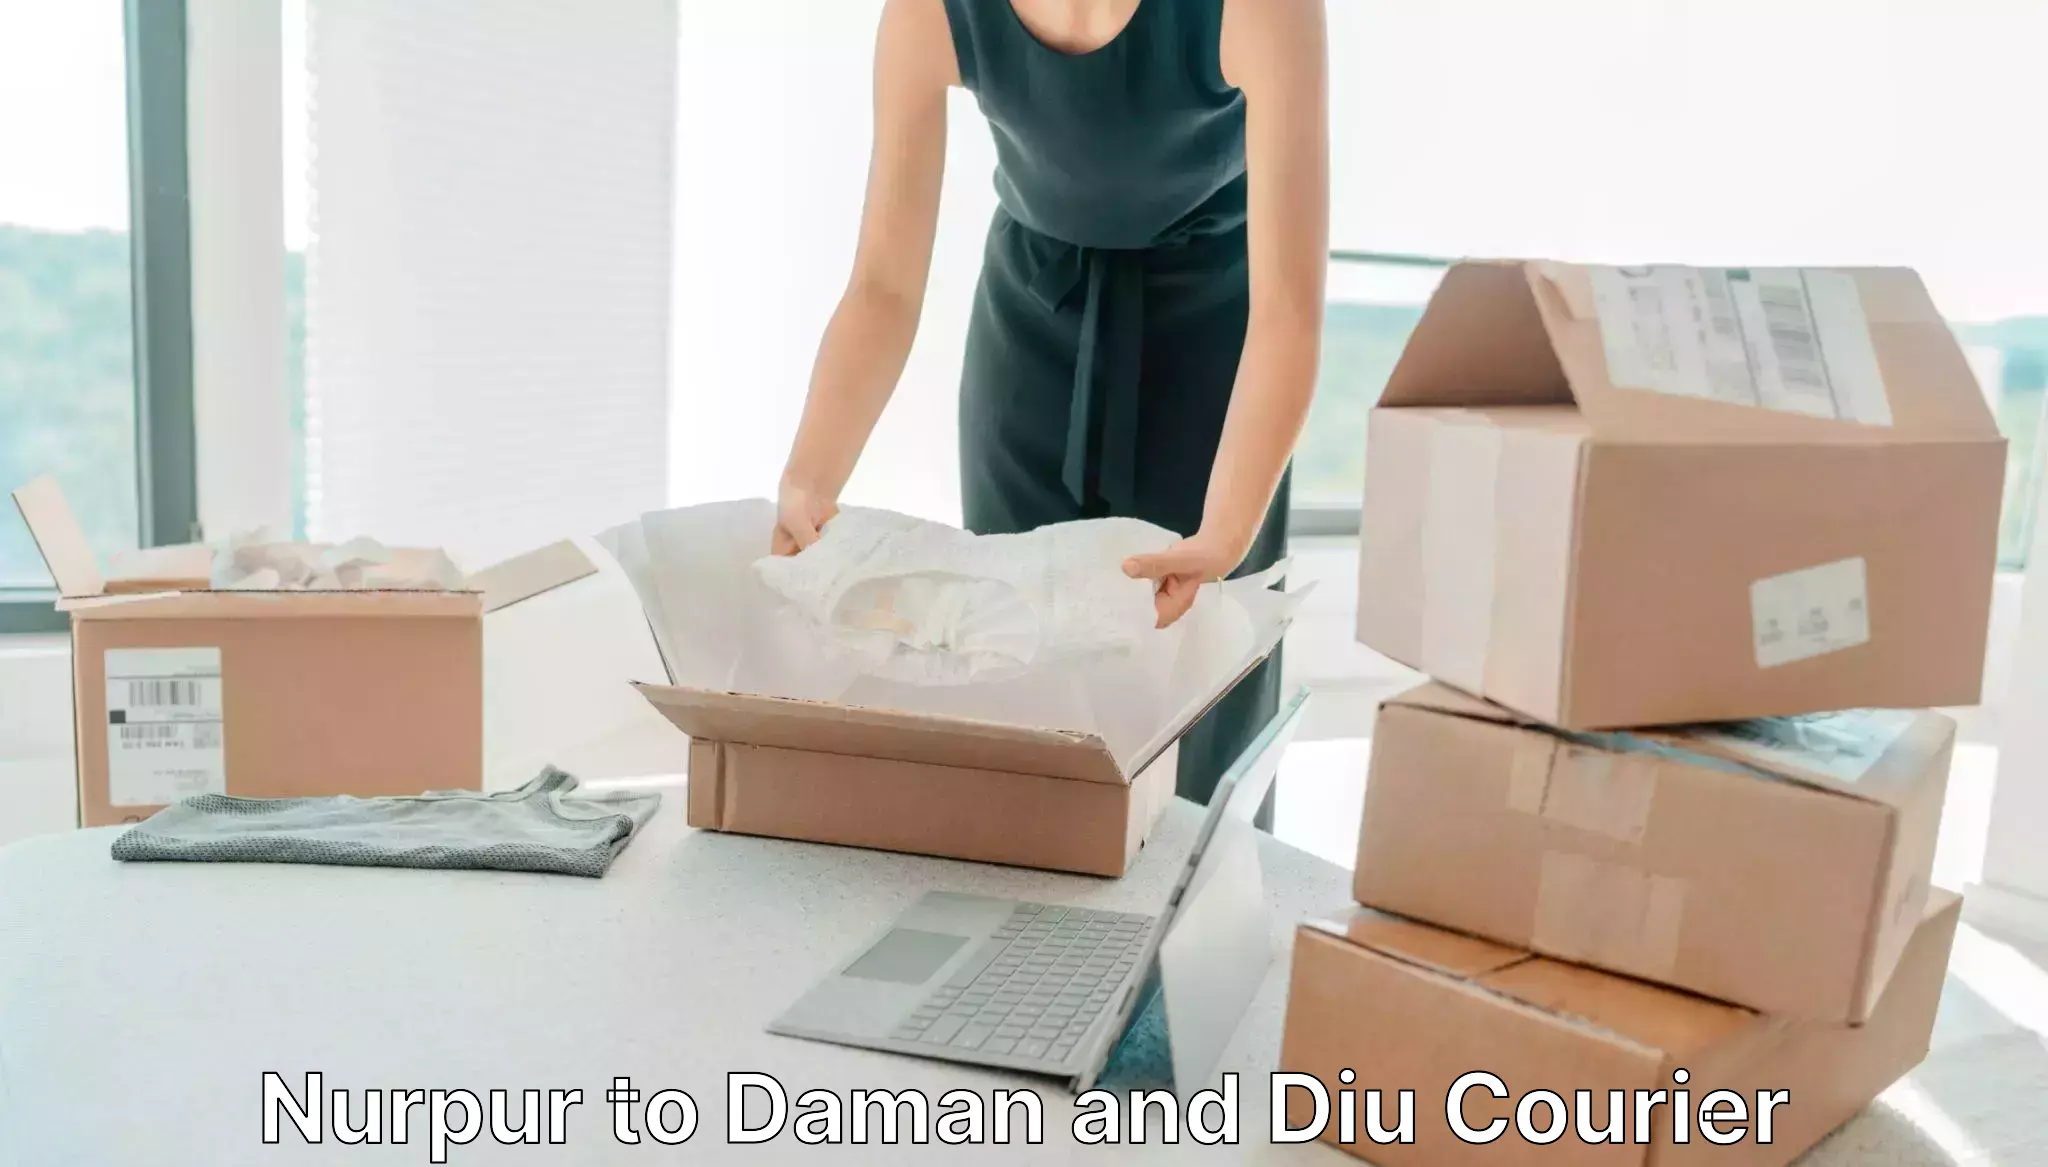 Round-the-clock parcel delivery Nurpur to Daman and Diu